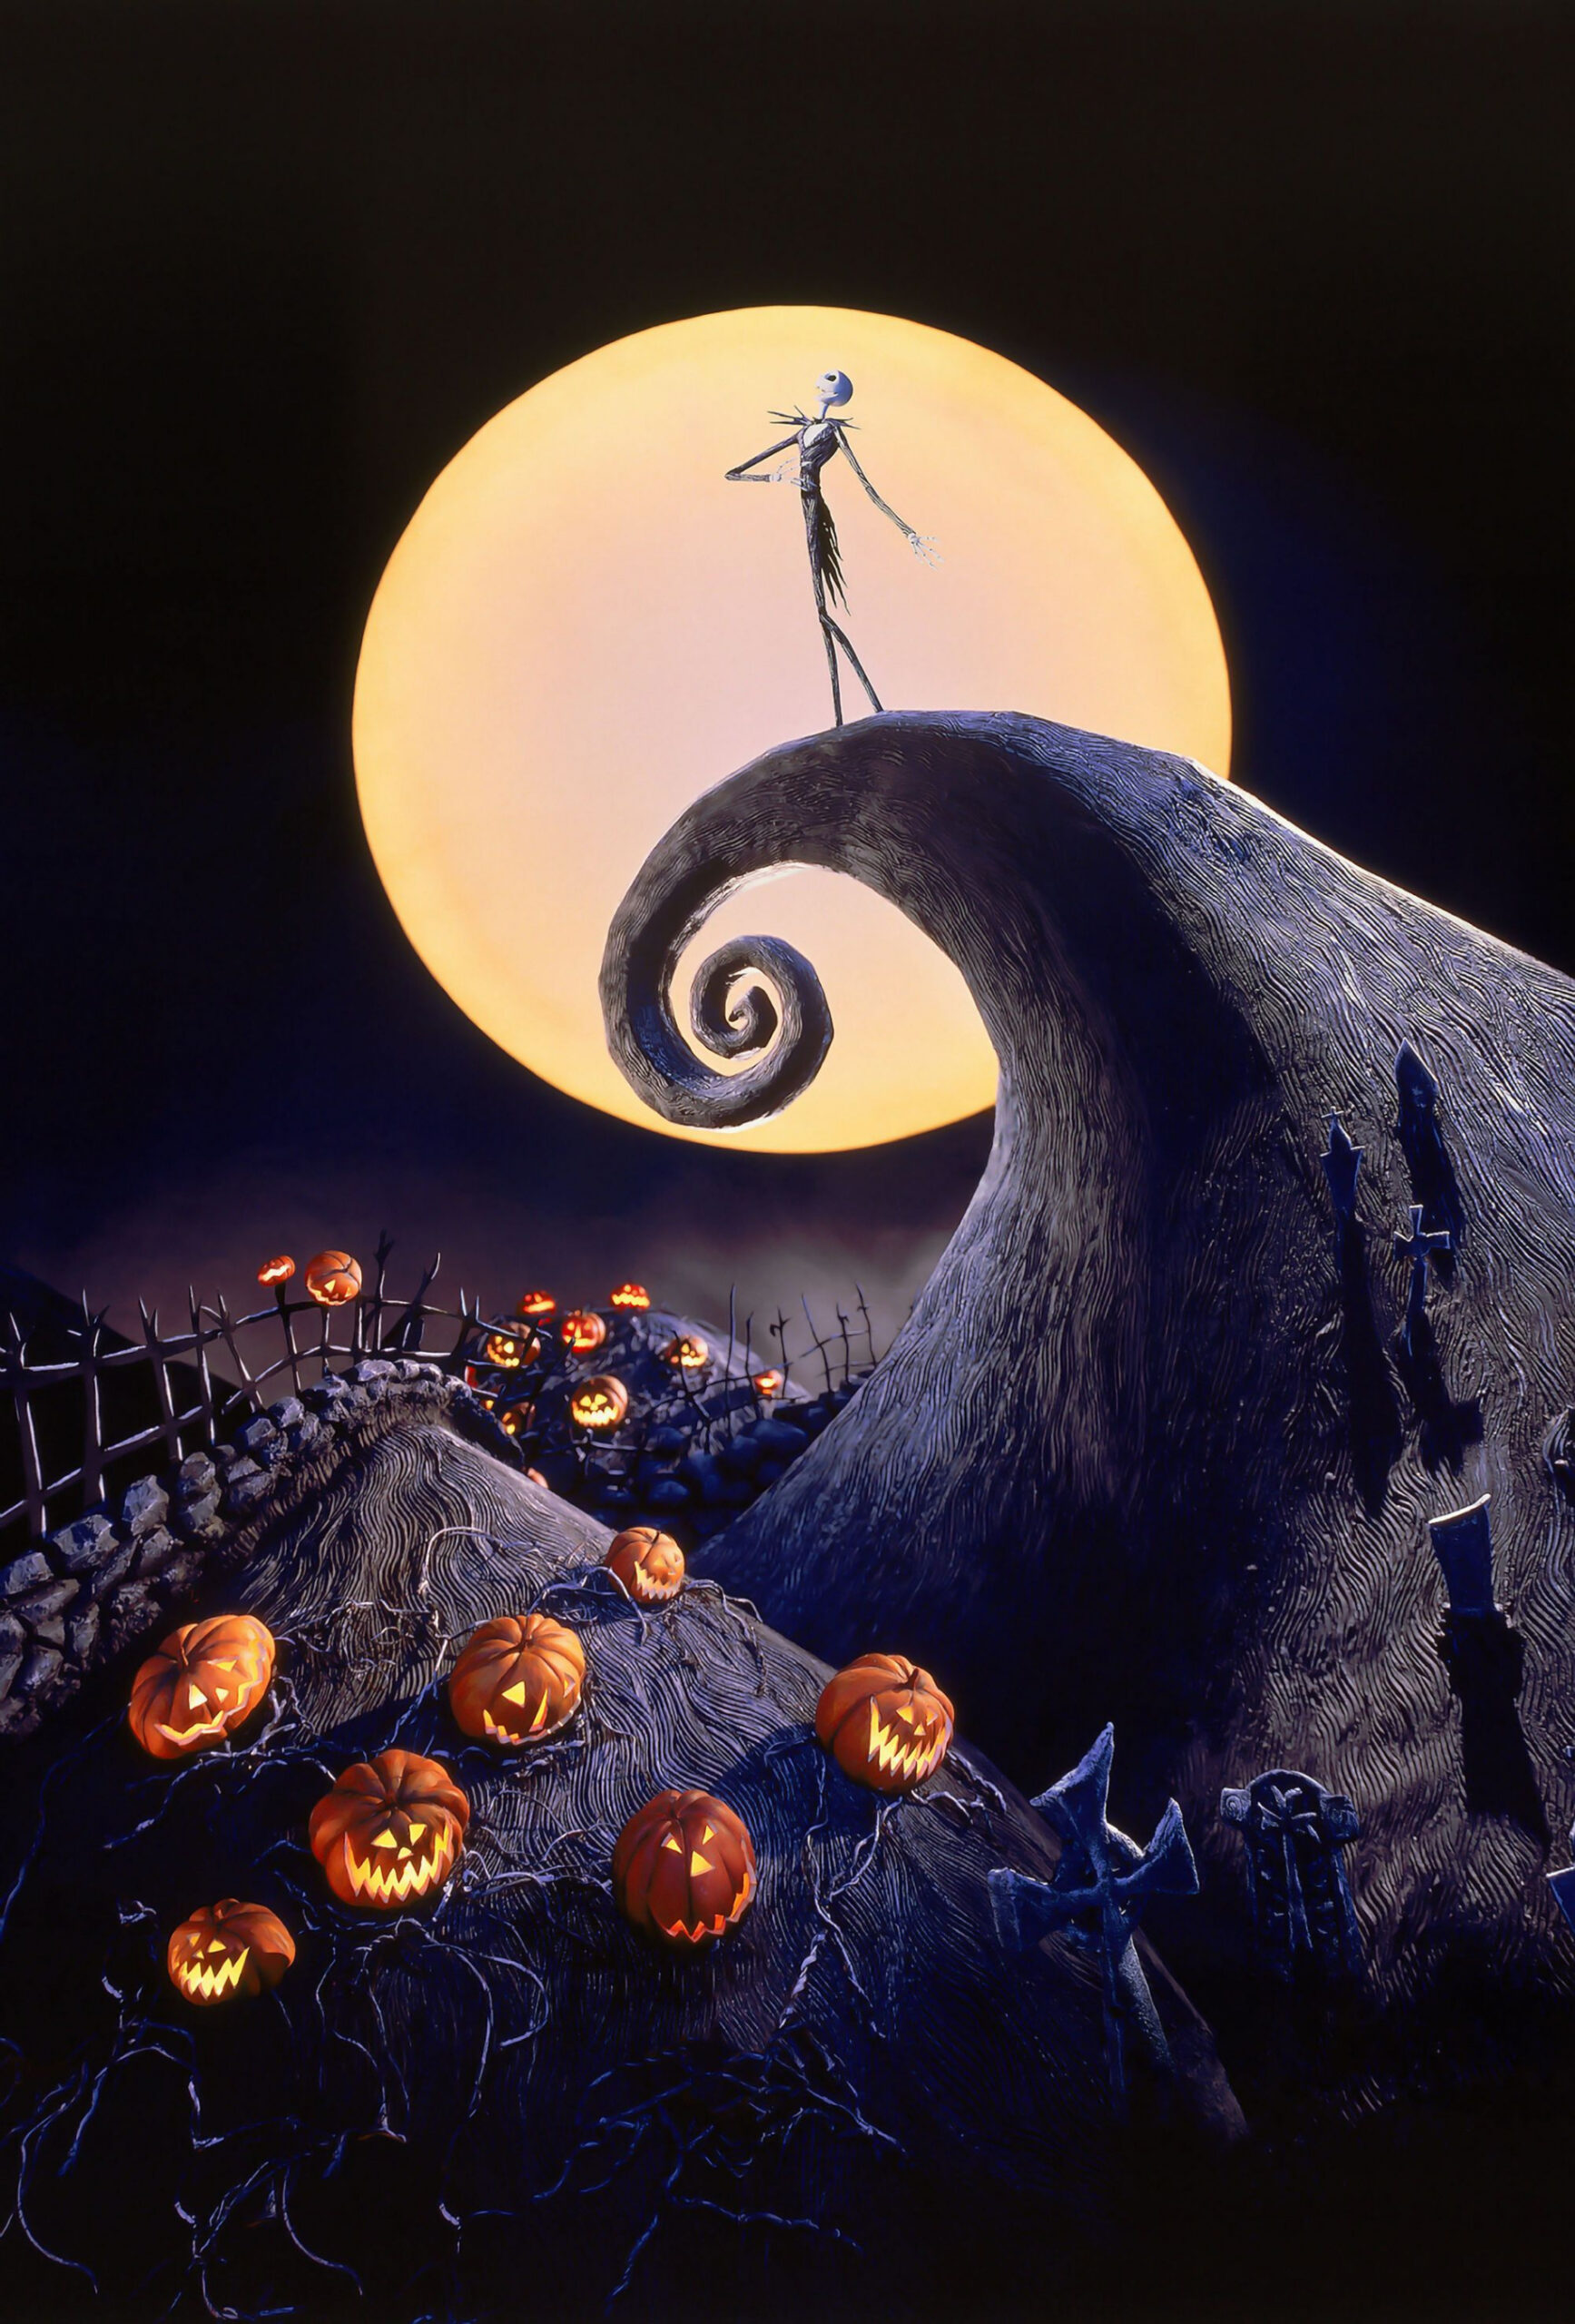 The Nightmare Before Christmas - Google Search  Nightmare before